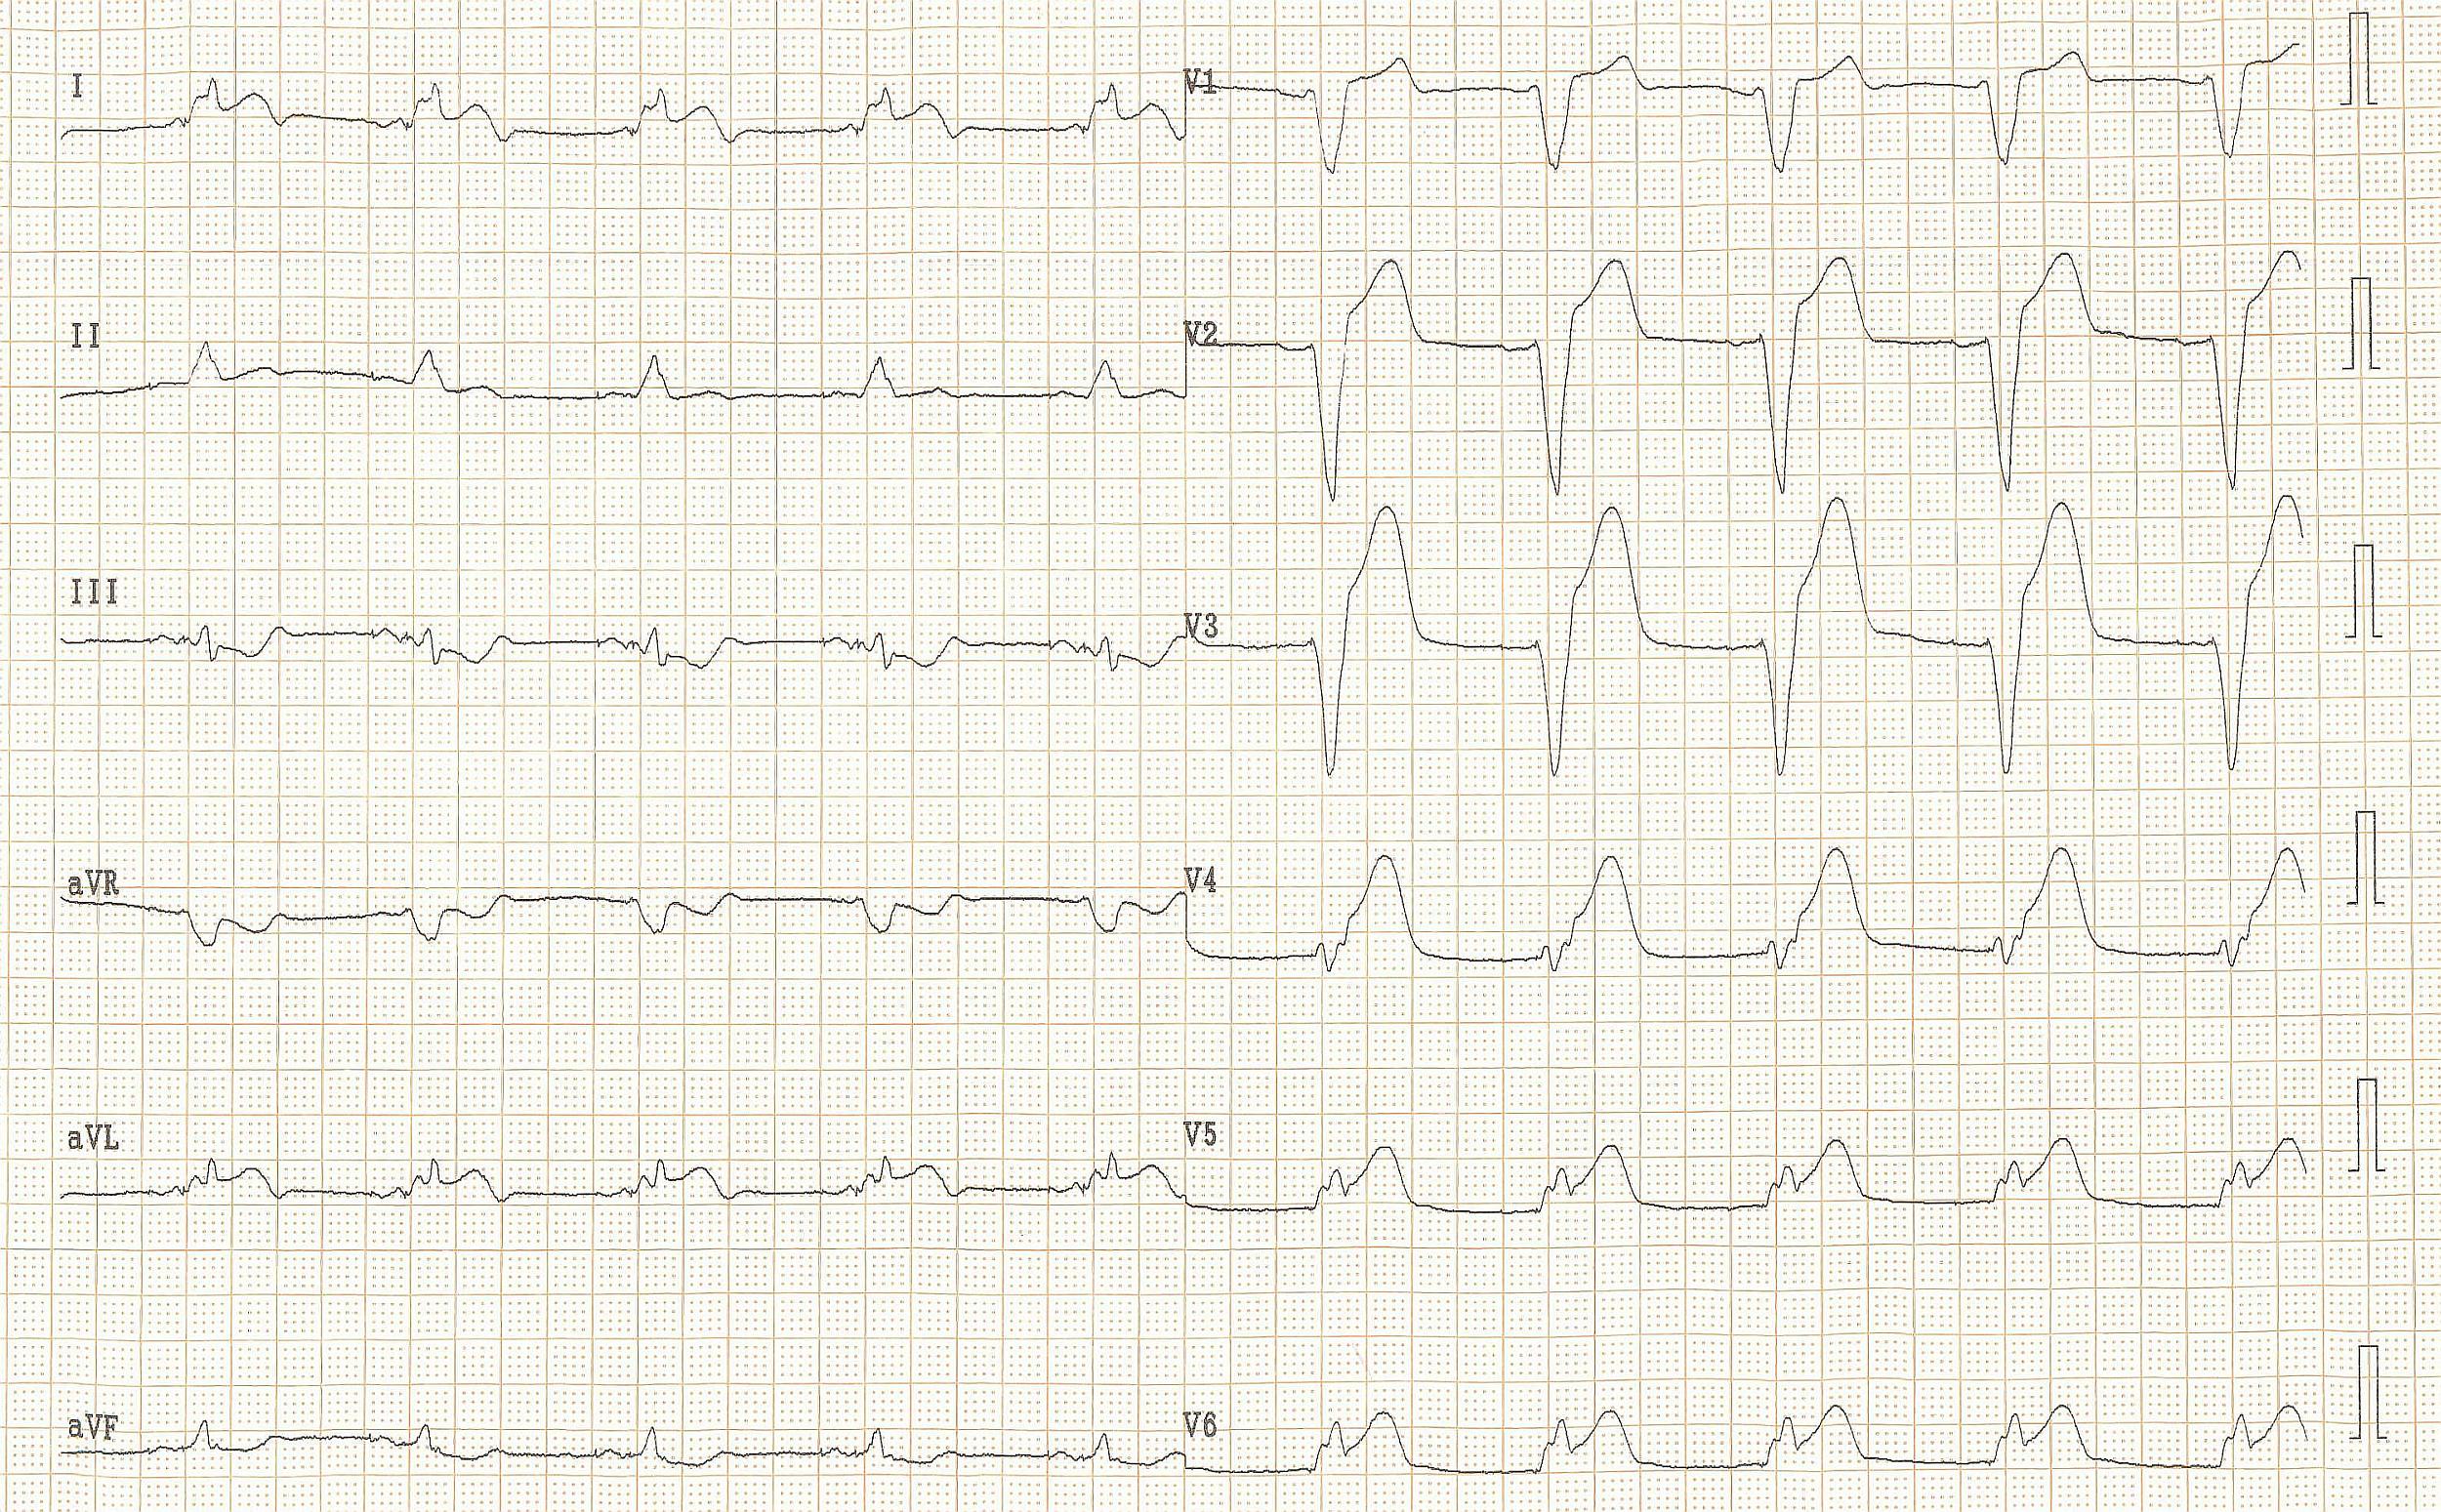 Acute myocardial infarction in in a patient with a pacemaker and LBBB. Concordant ST elevation in V5-V6 are clearly visible. There is discordant ST segment elevation > 5 mm in lead V3.